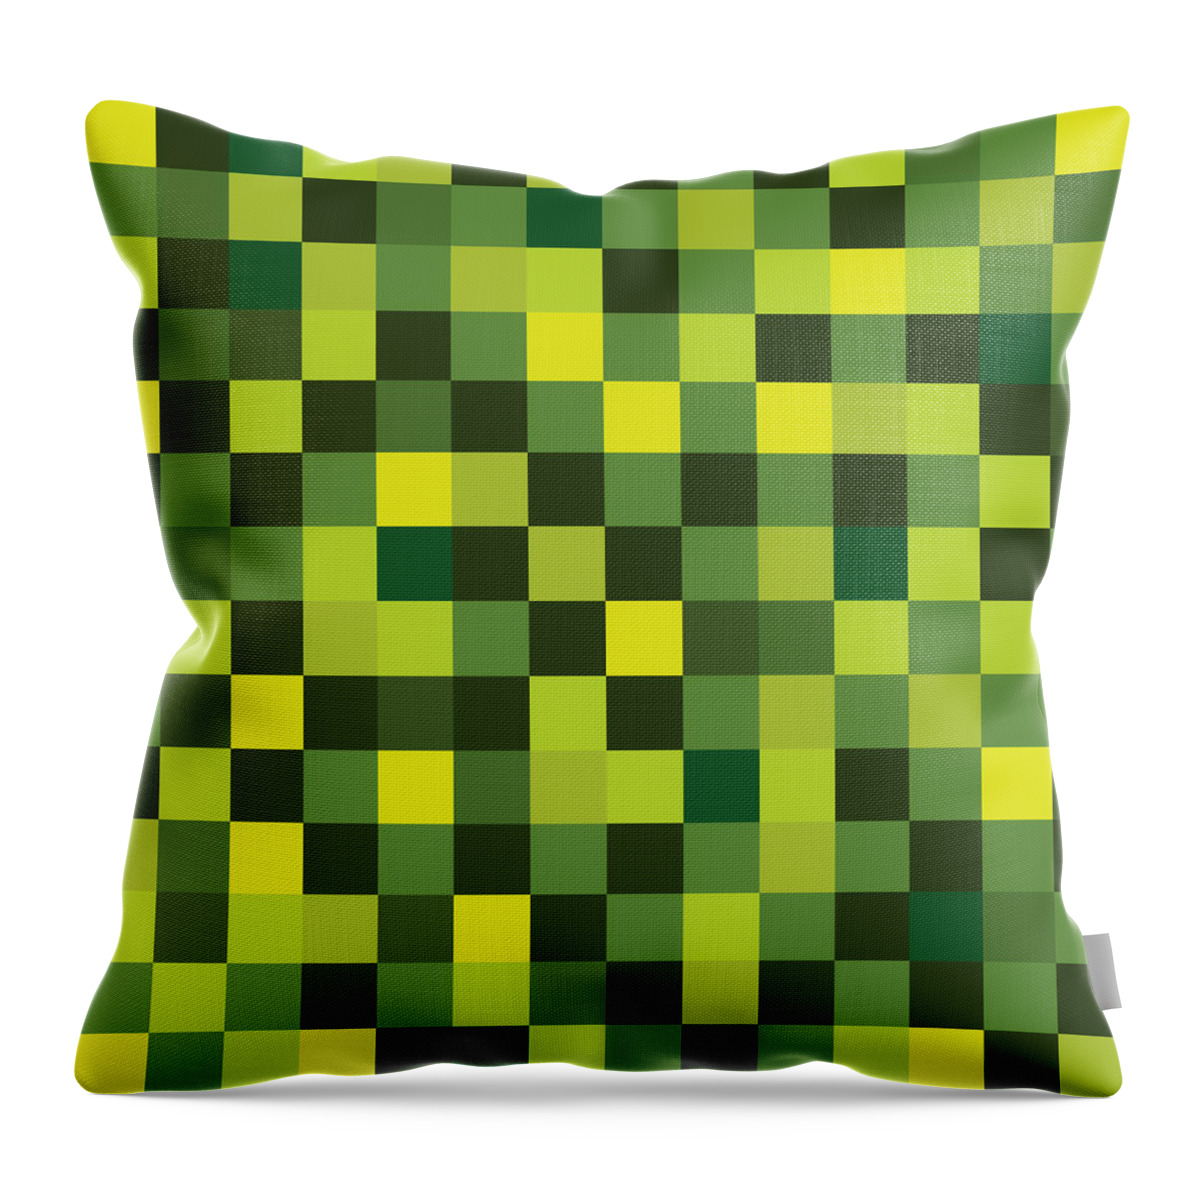 Abstract Throw Pillow featuring the digital art Pixel Art by Mike Taylor